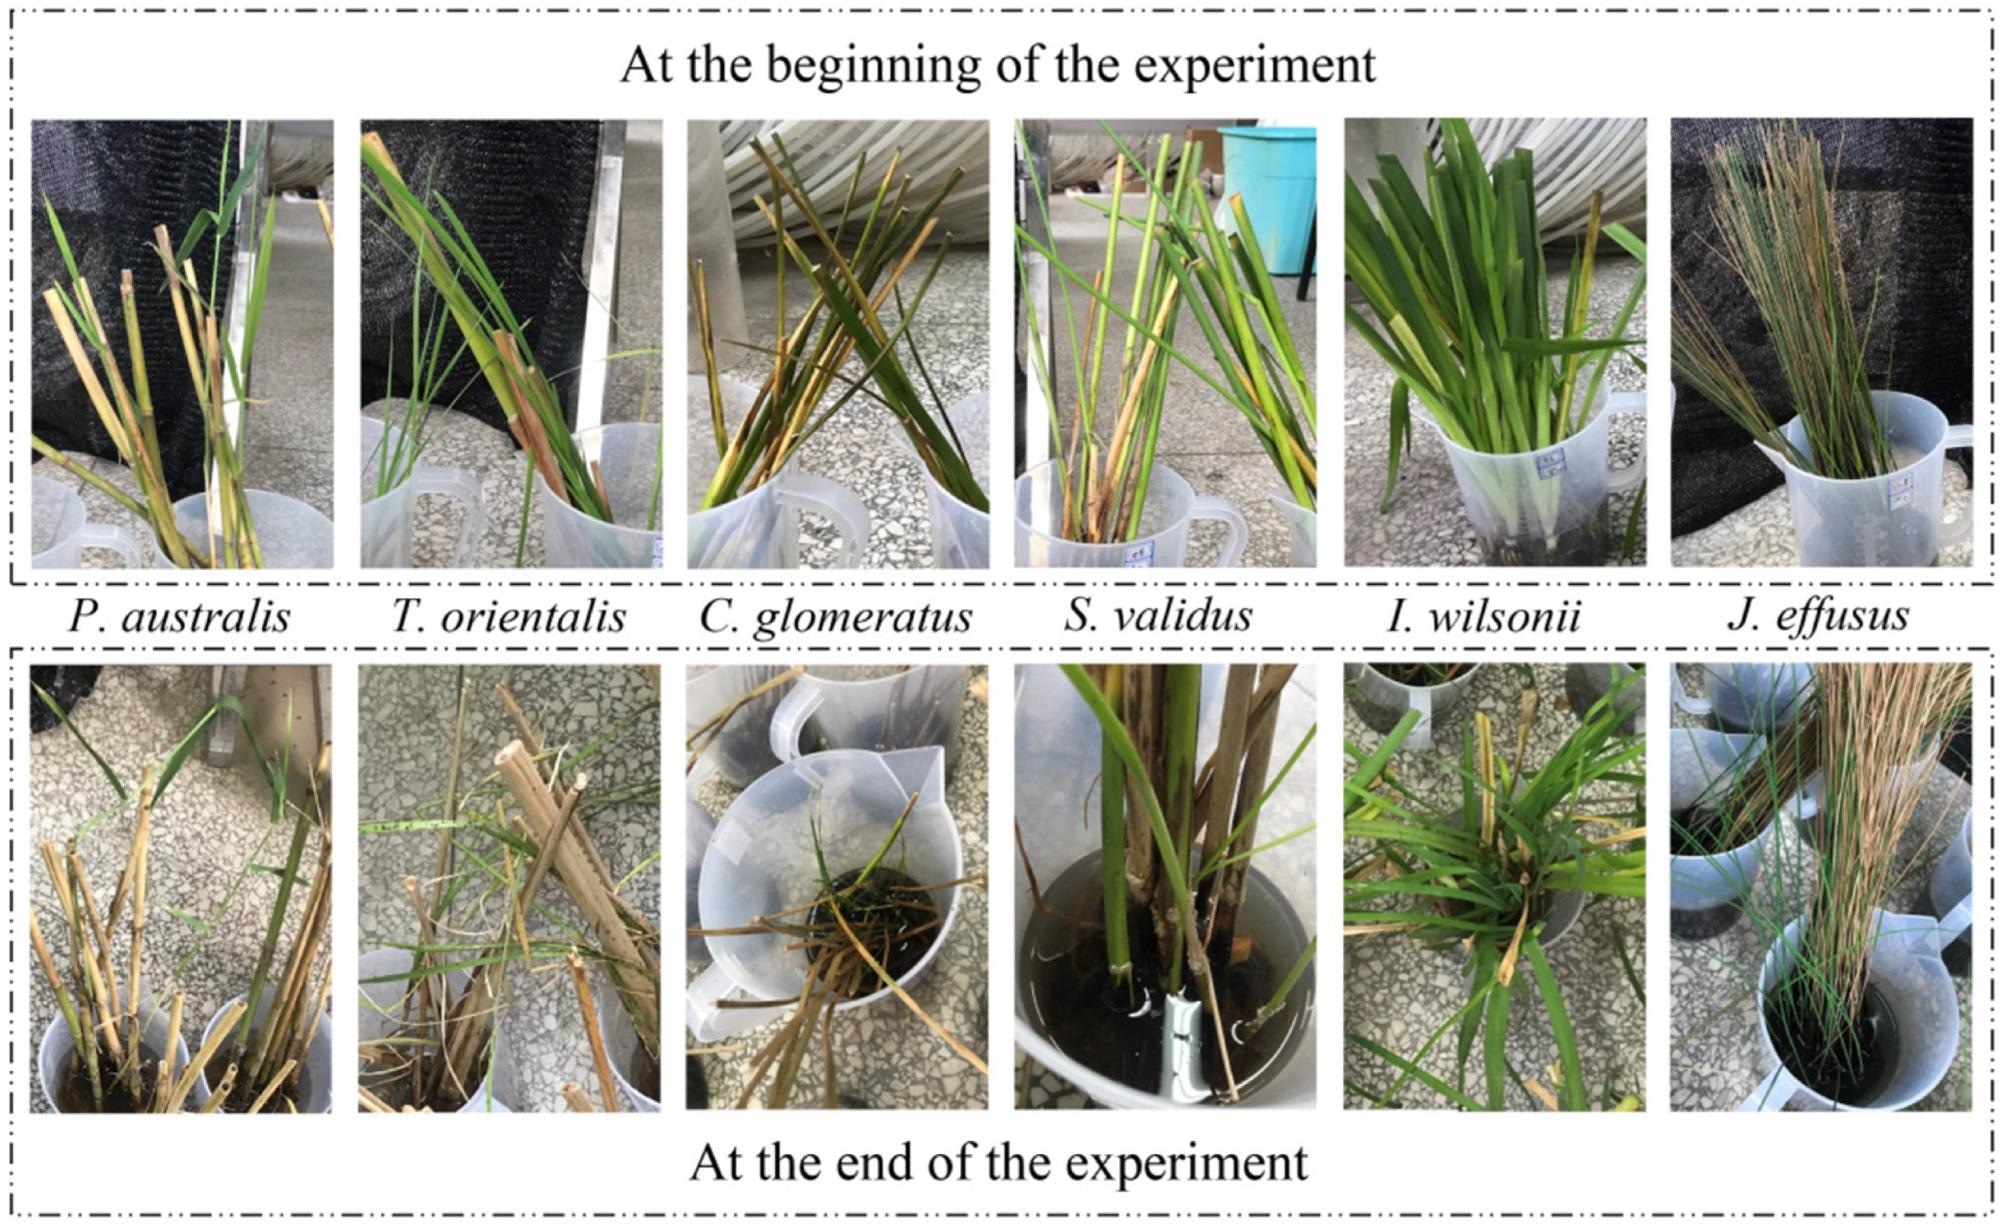 Comparison of the growth status of each plant before and after the experiment.